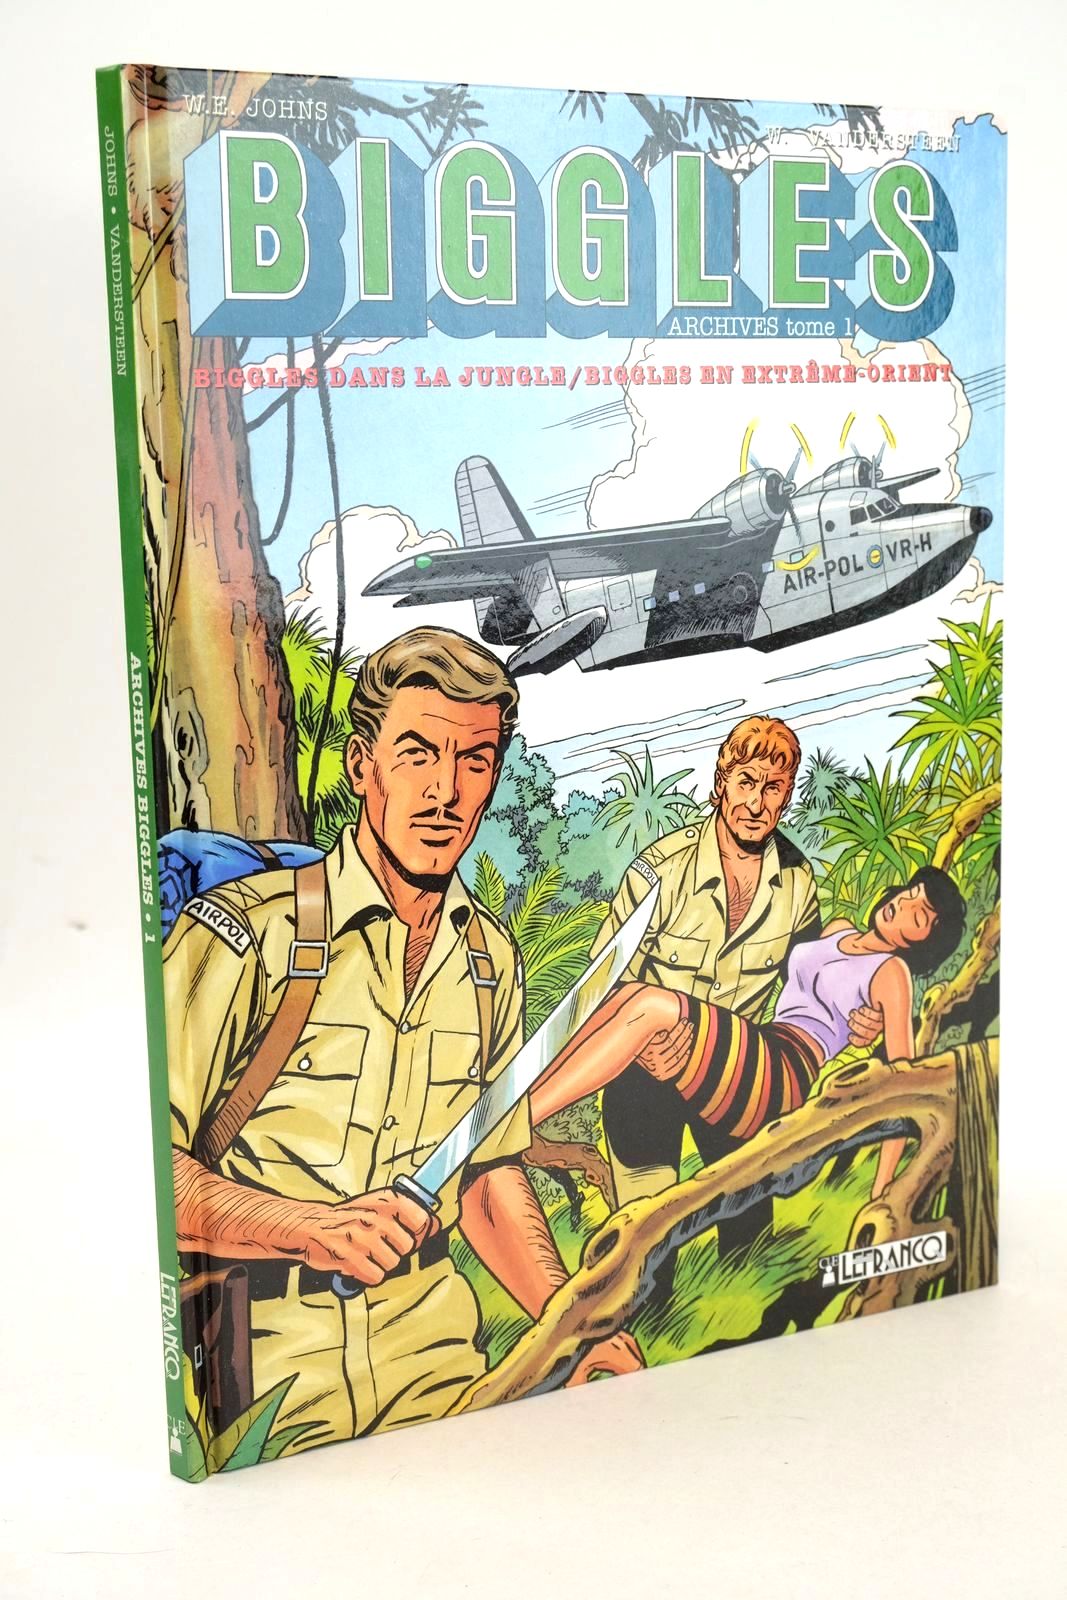 Photo of BIGGLES ARCHIVES 1 - BIGGLES EN EXTREME-ORIENT written by Johns, W.E. Vandersteen, Willy illustrated by Vandersteen, Willy Bergese, Francis published by Claude Lefrancq Editeur (STOCK CODE: 1326329)  for sale by Stella & Rose's Books